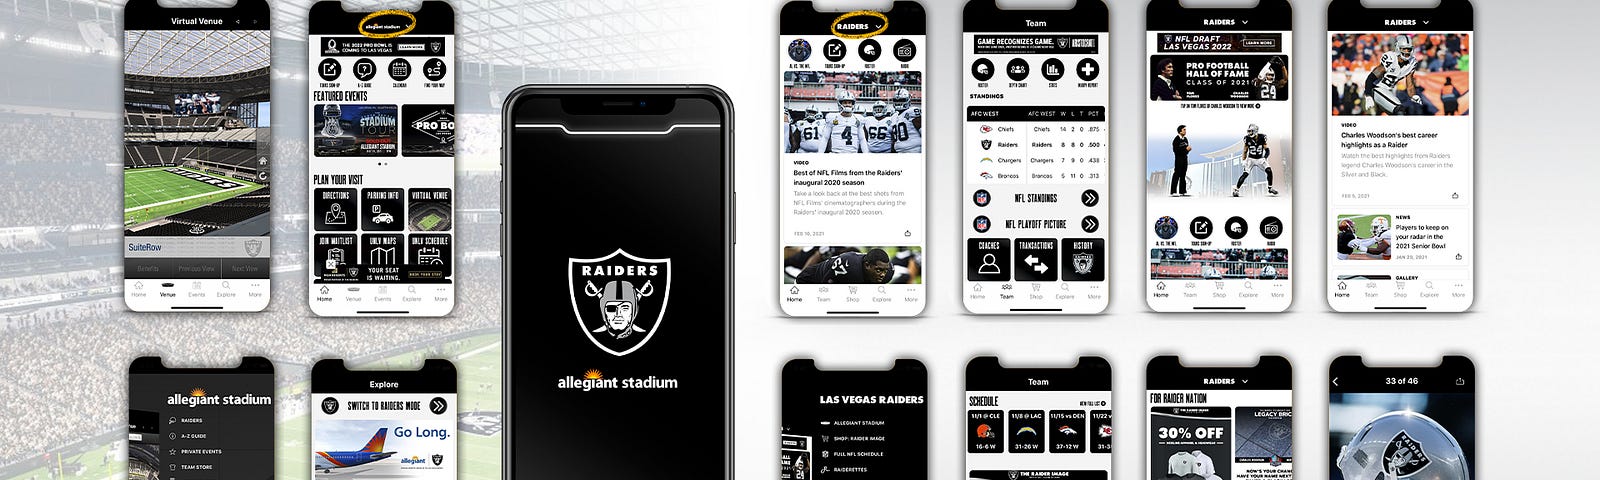 Your mobile destination for all things Raiders and Allegiant Stadium. Mobile sports app.